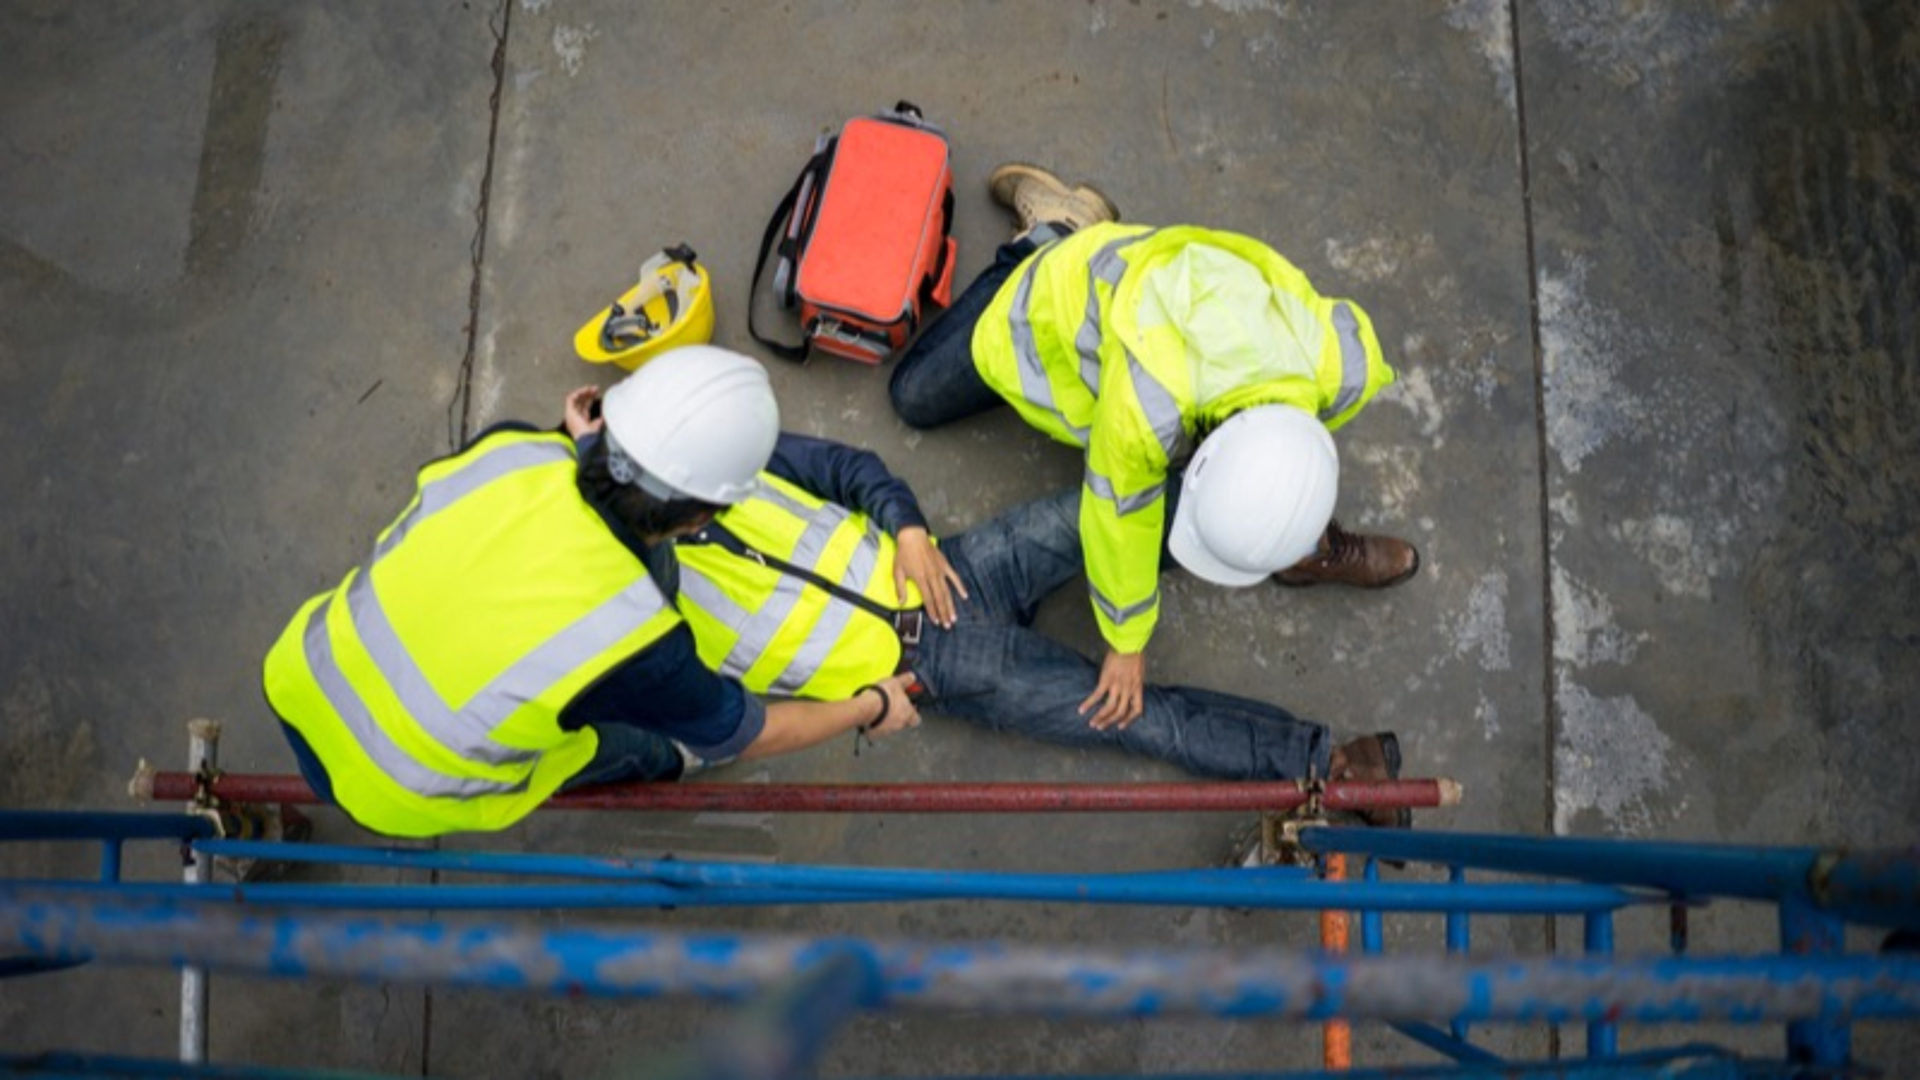 Two workers assisting a third one who is on the floor injured. They are all wearing high-vis jackets.